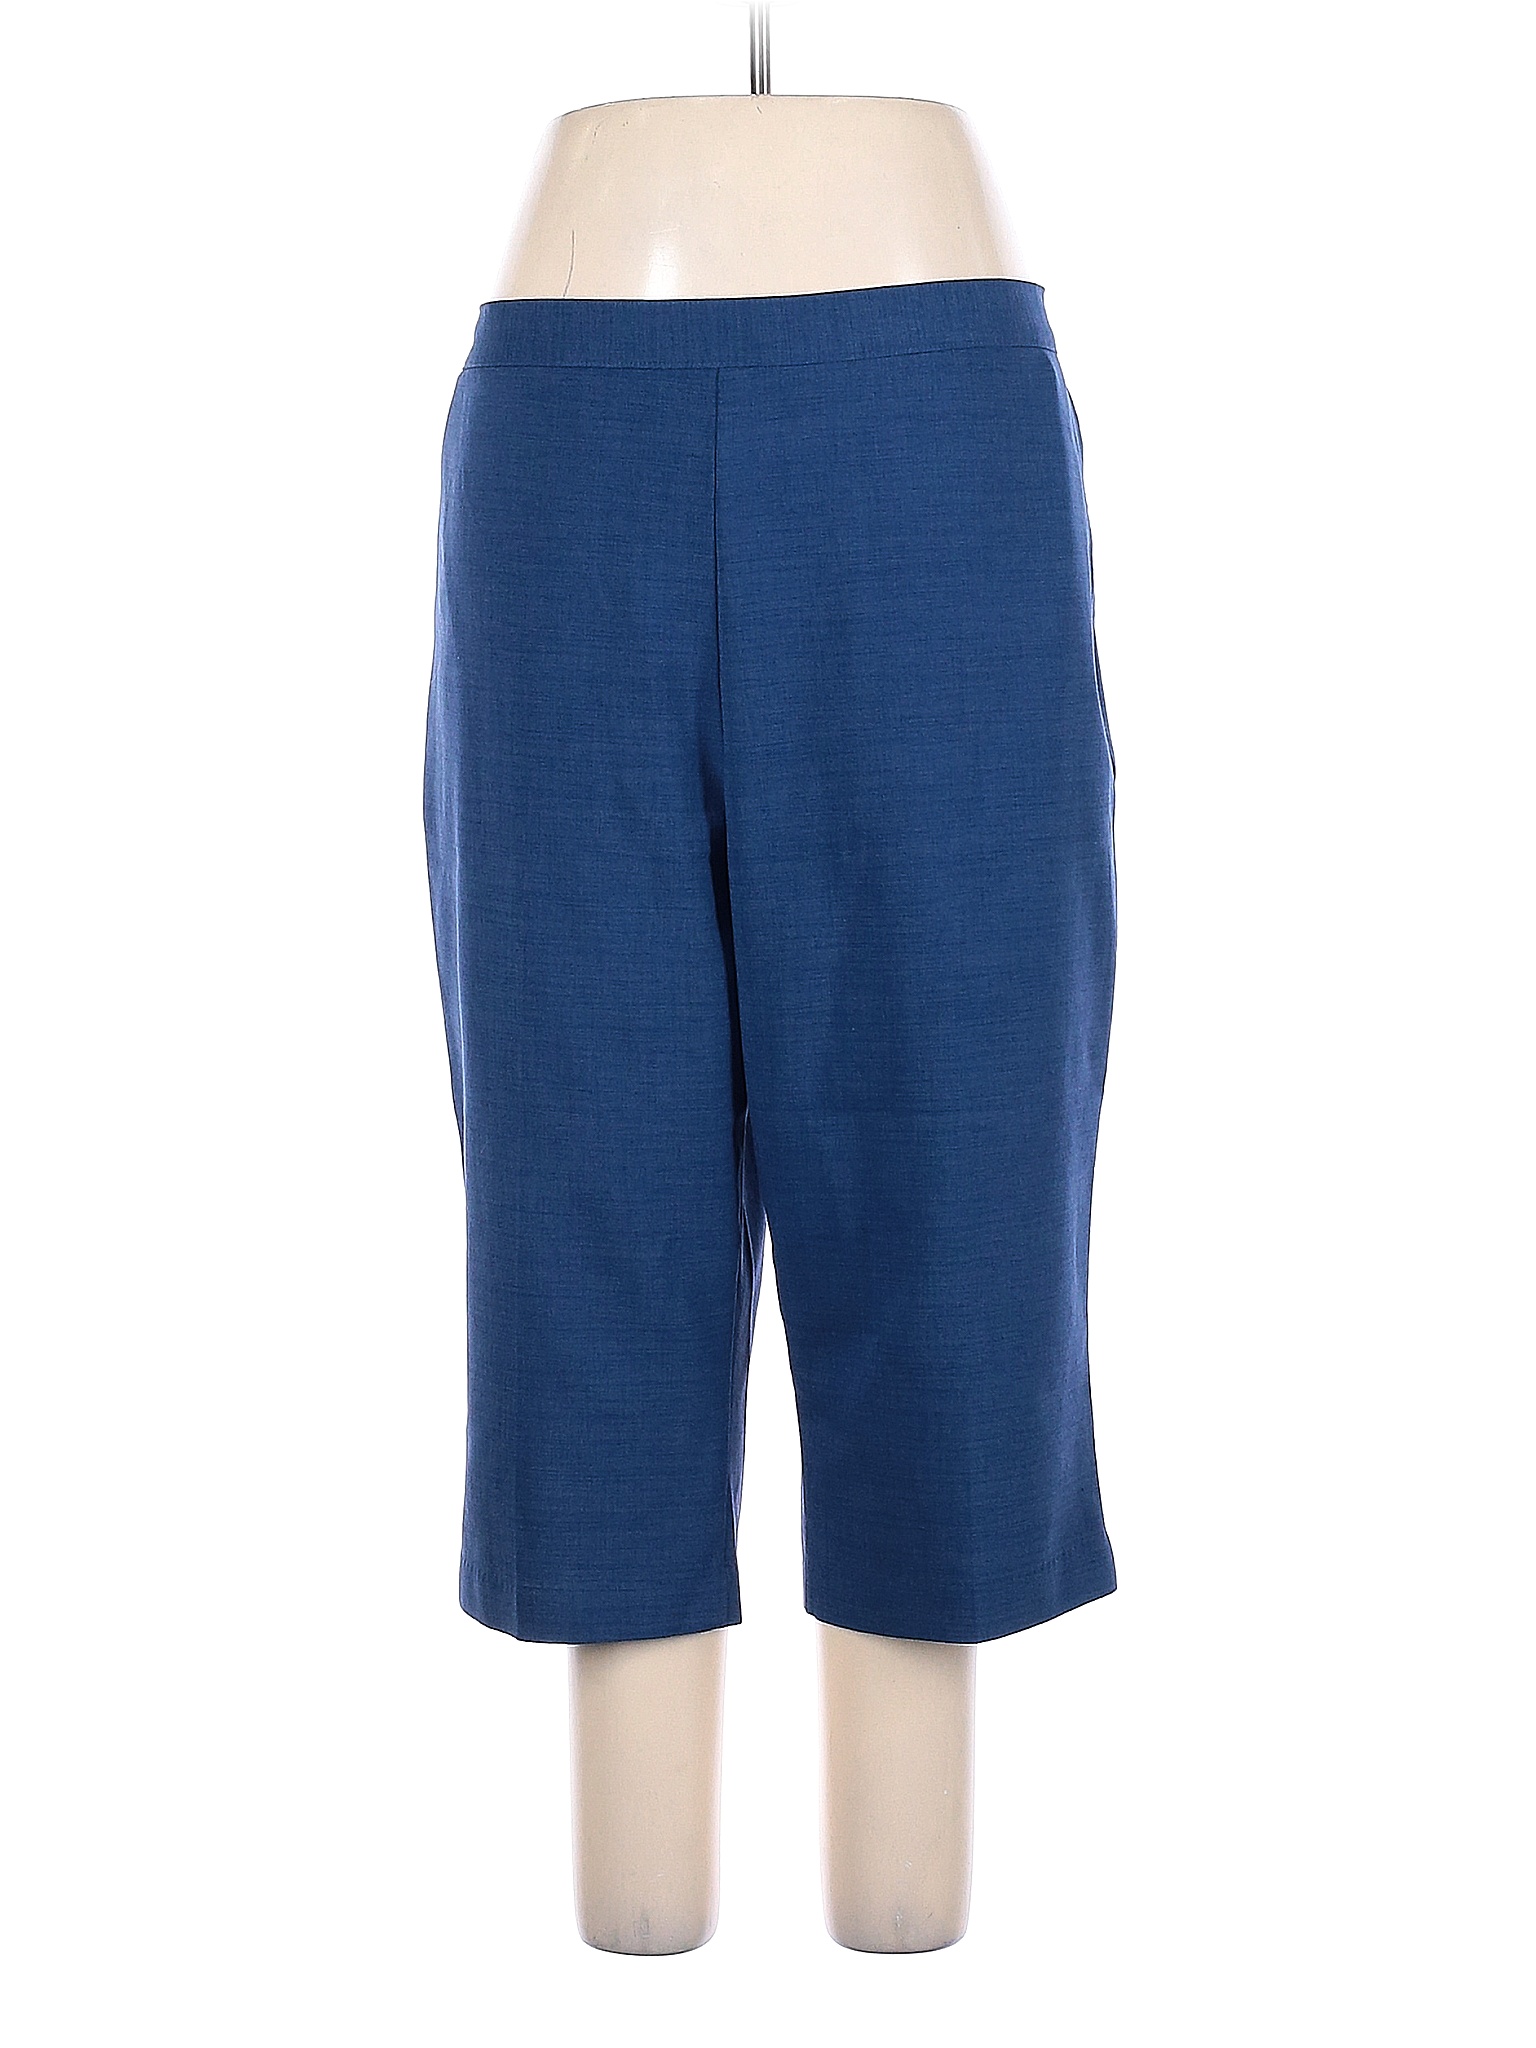 BonWorth 100% Polyester Solid Blue Casual Pants Size XL - 56% off | thredUP